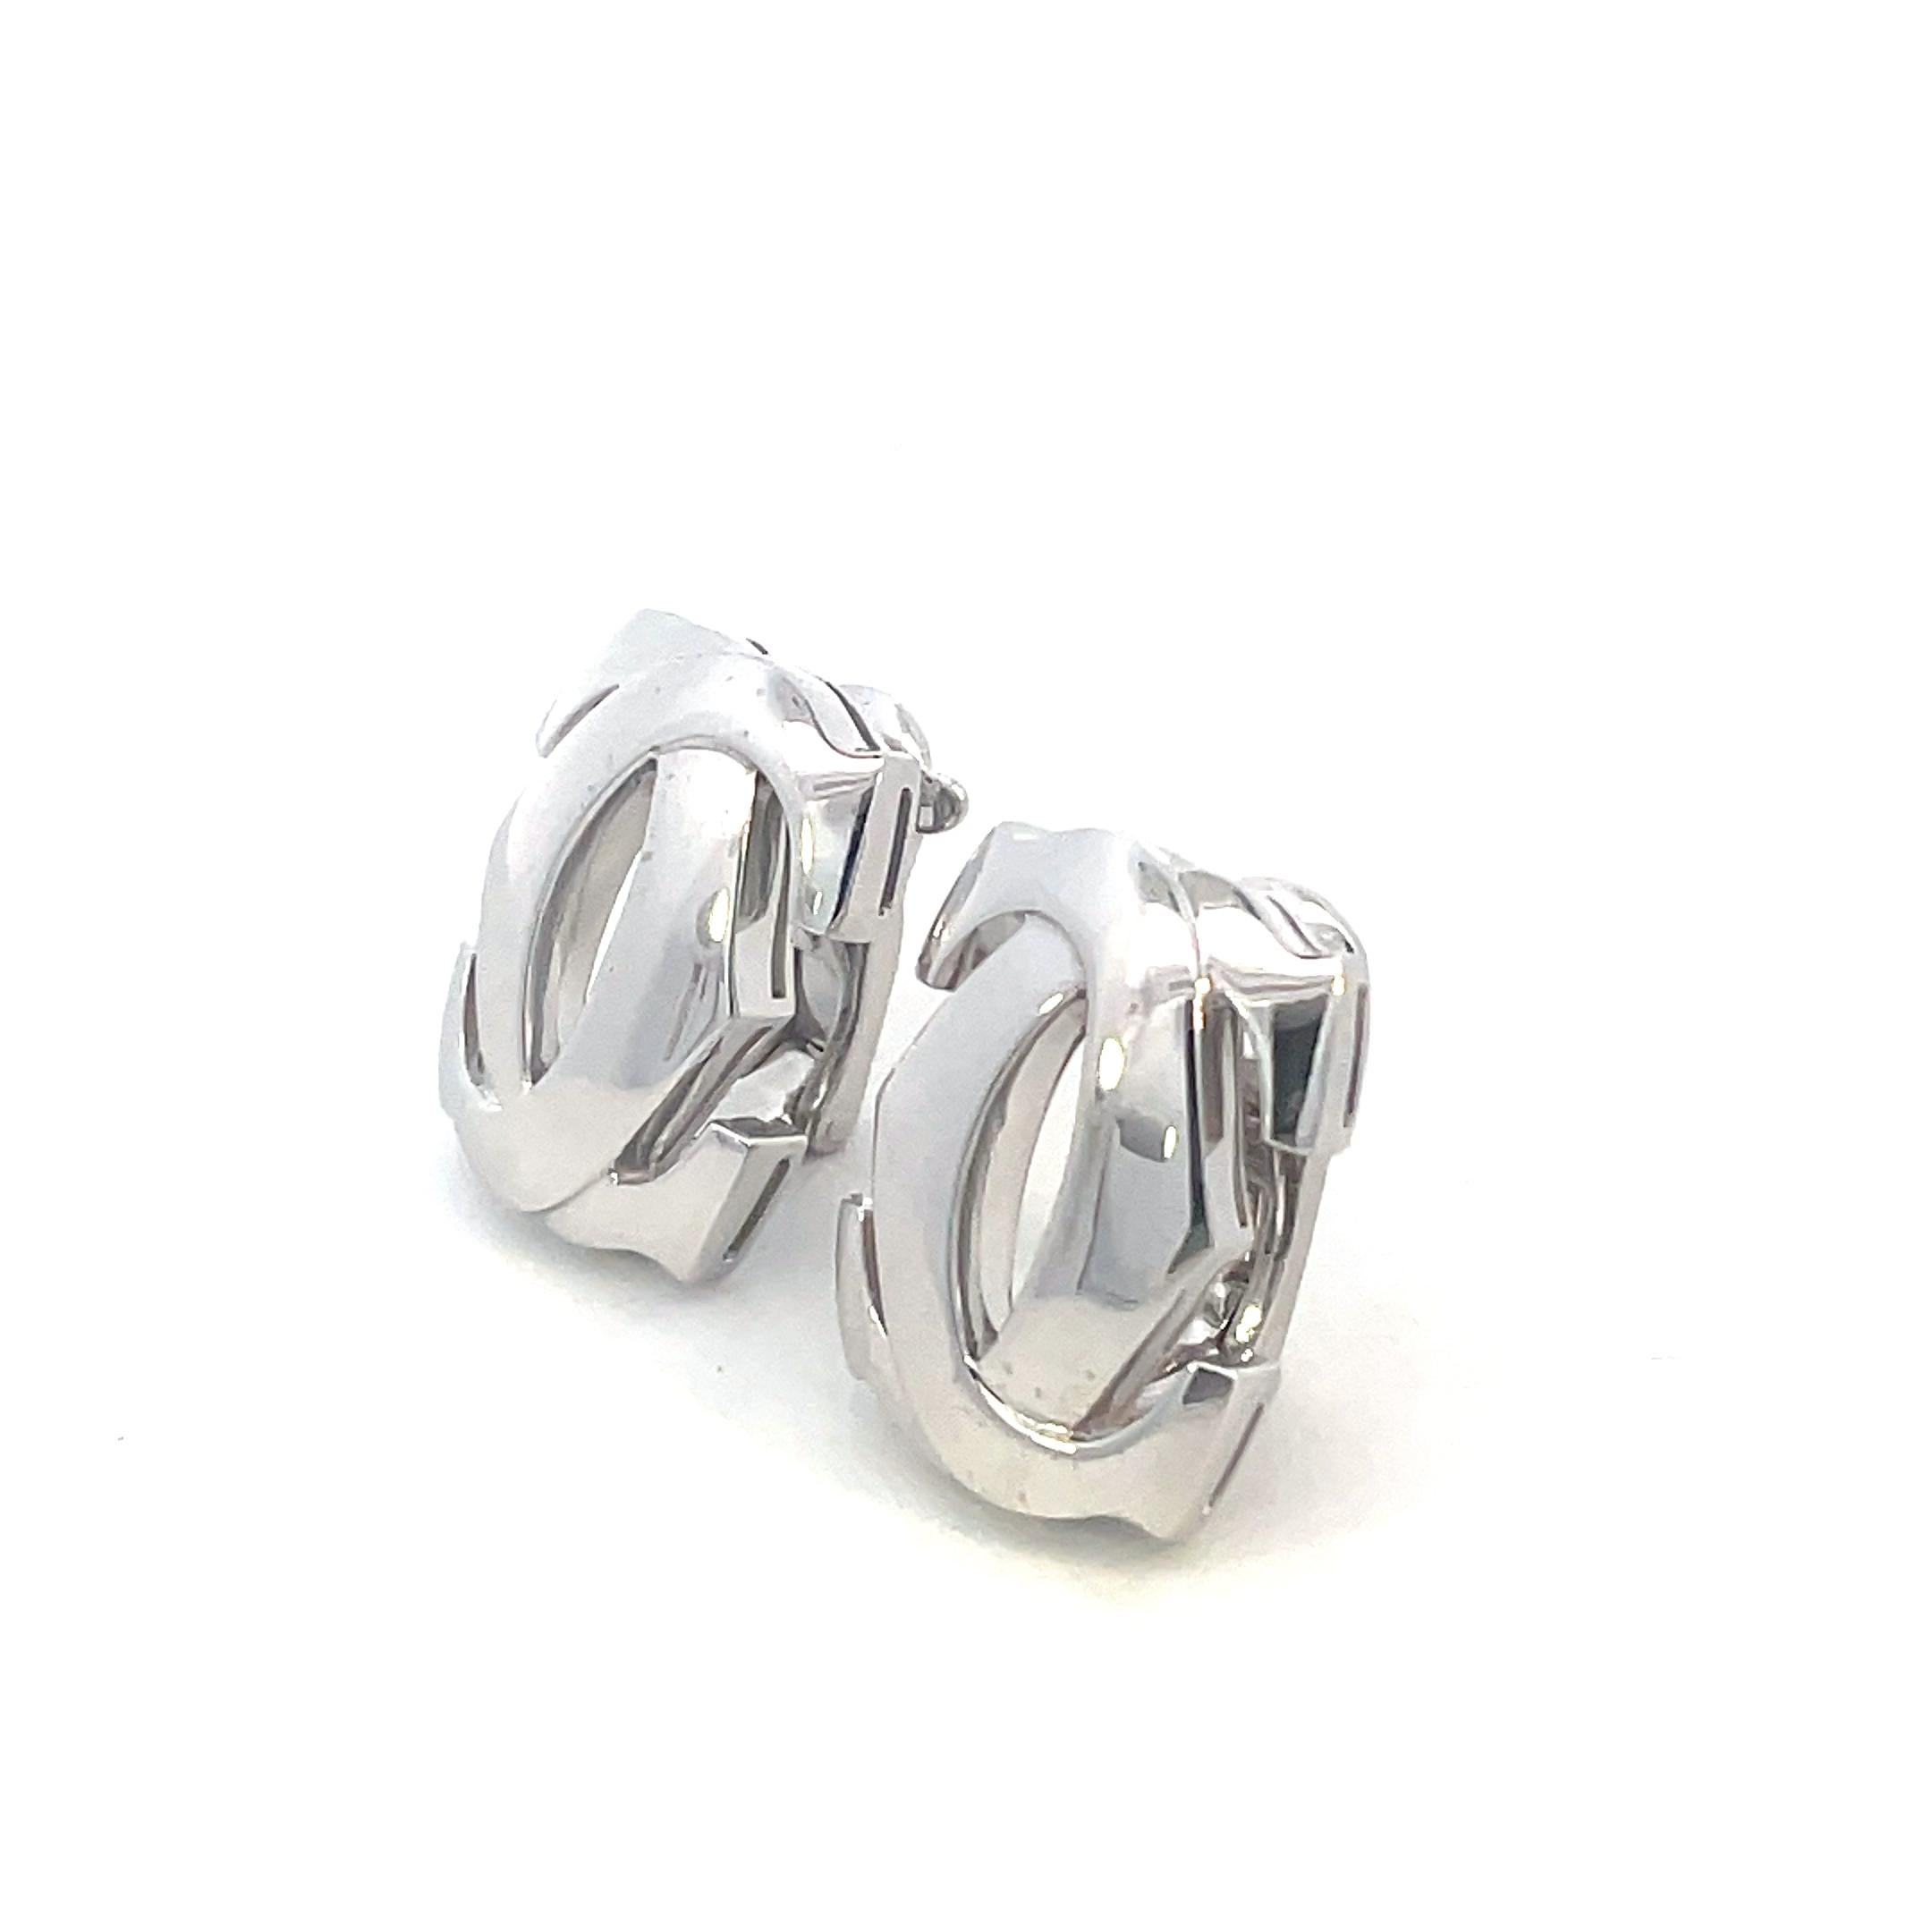 Cartier 18K White Gold Penelope Double C earrings weighing 18 grams. Excellent pre-owned condition. Signed and numbered, french marks.
100% Original guaranteed